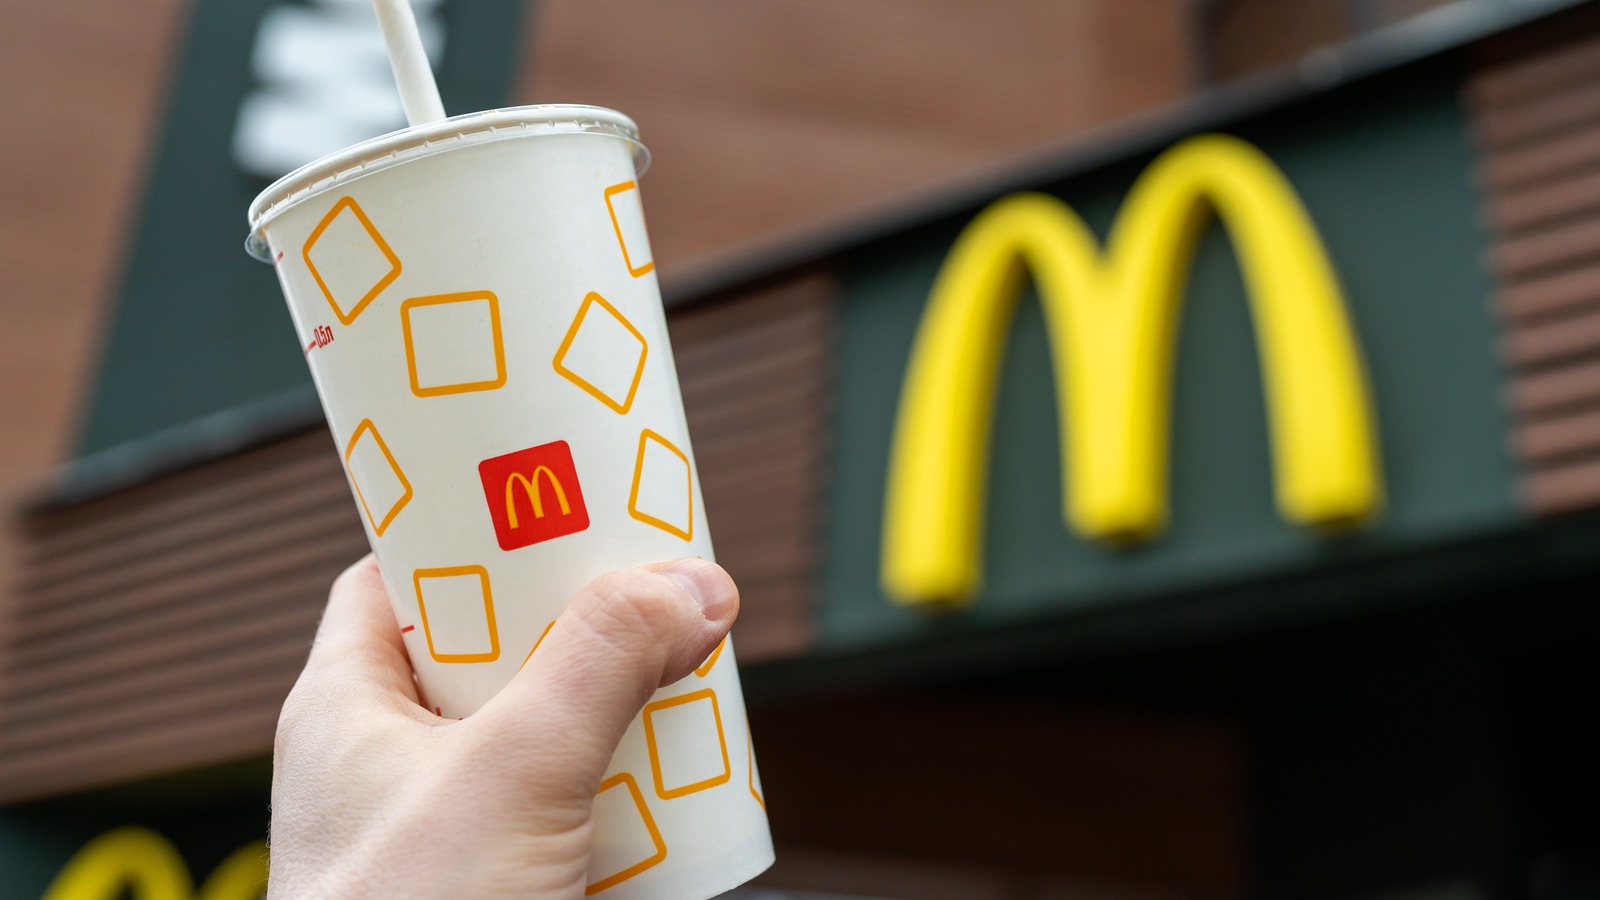 McDonald's Is Doing Away With Its Self-Serve Beverage Stations